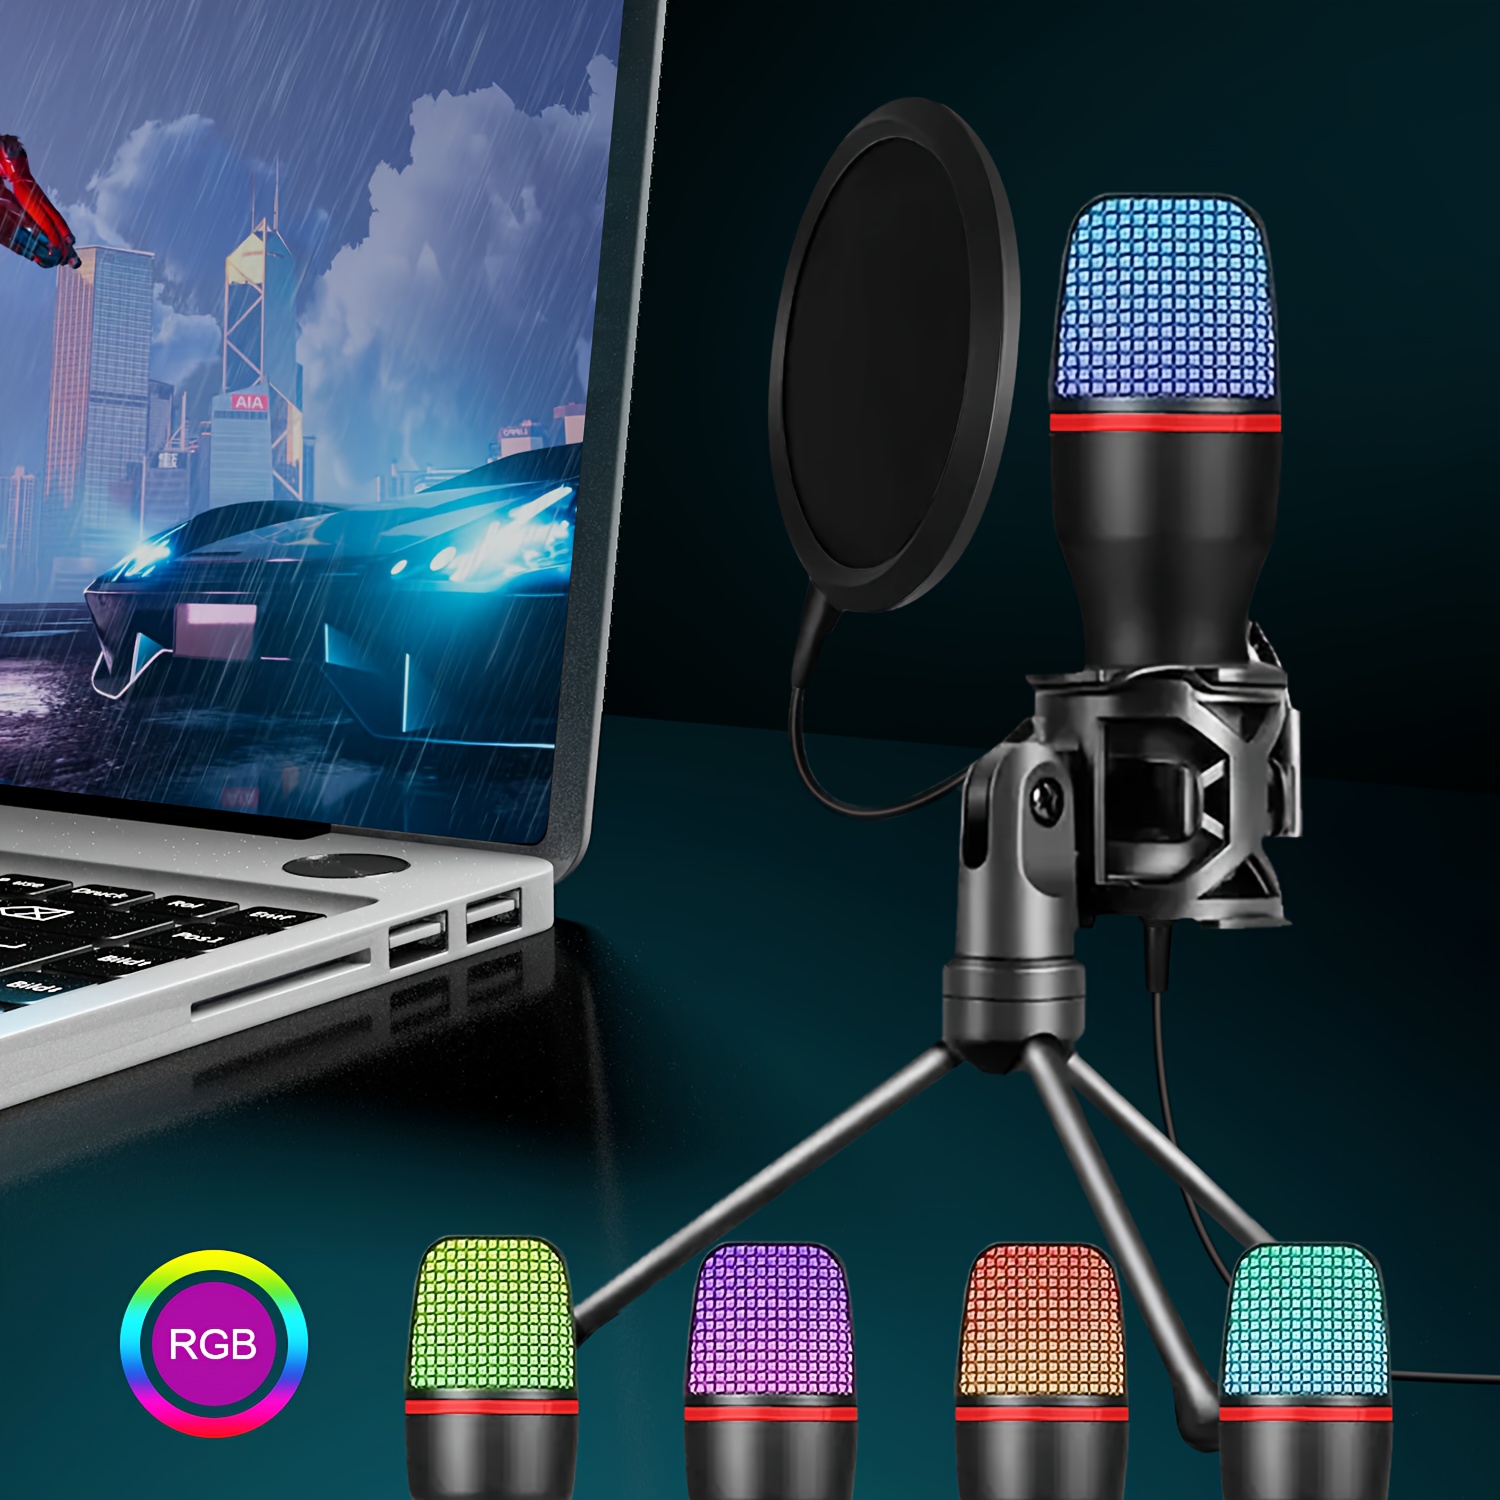 

Usb Microphone For Recording And Streaming For Pc And , Microphone With Tripod And Rgb Modes, Filter For Streaming Media, Podcasts, Voice Recording, Compatible With Laptop Desktop Pc Usb